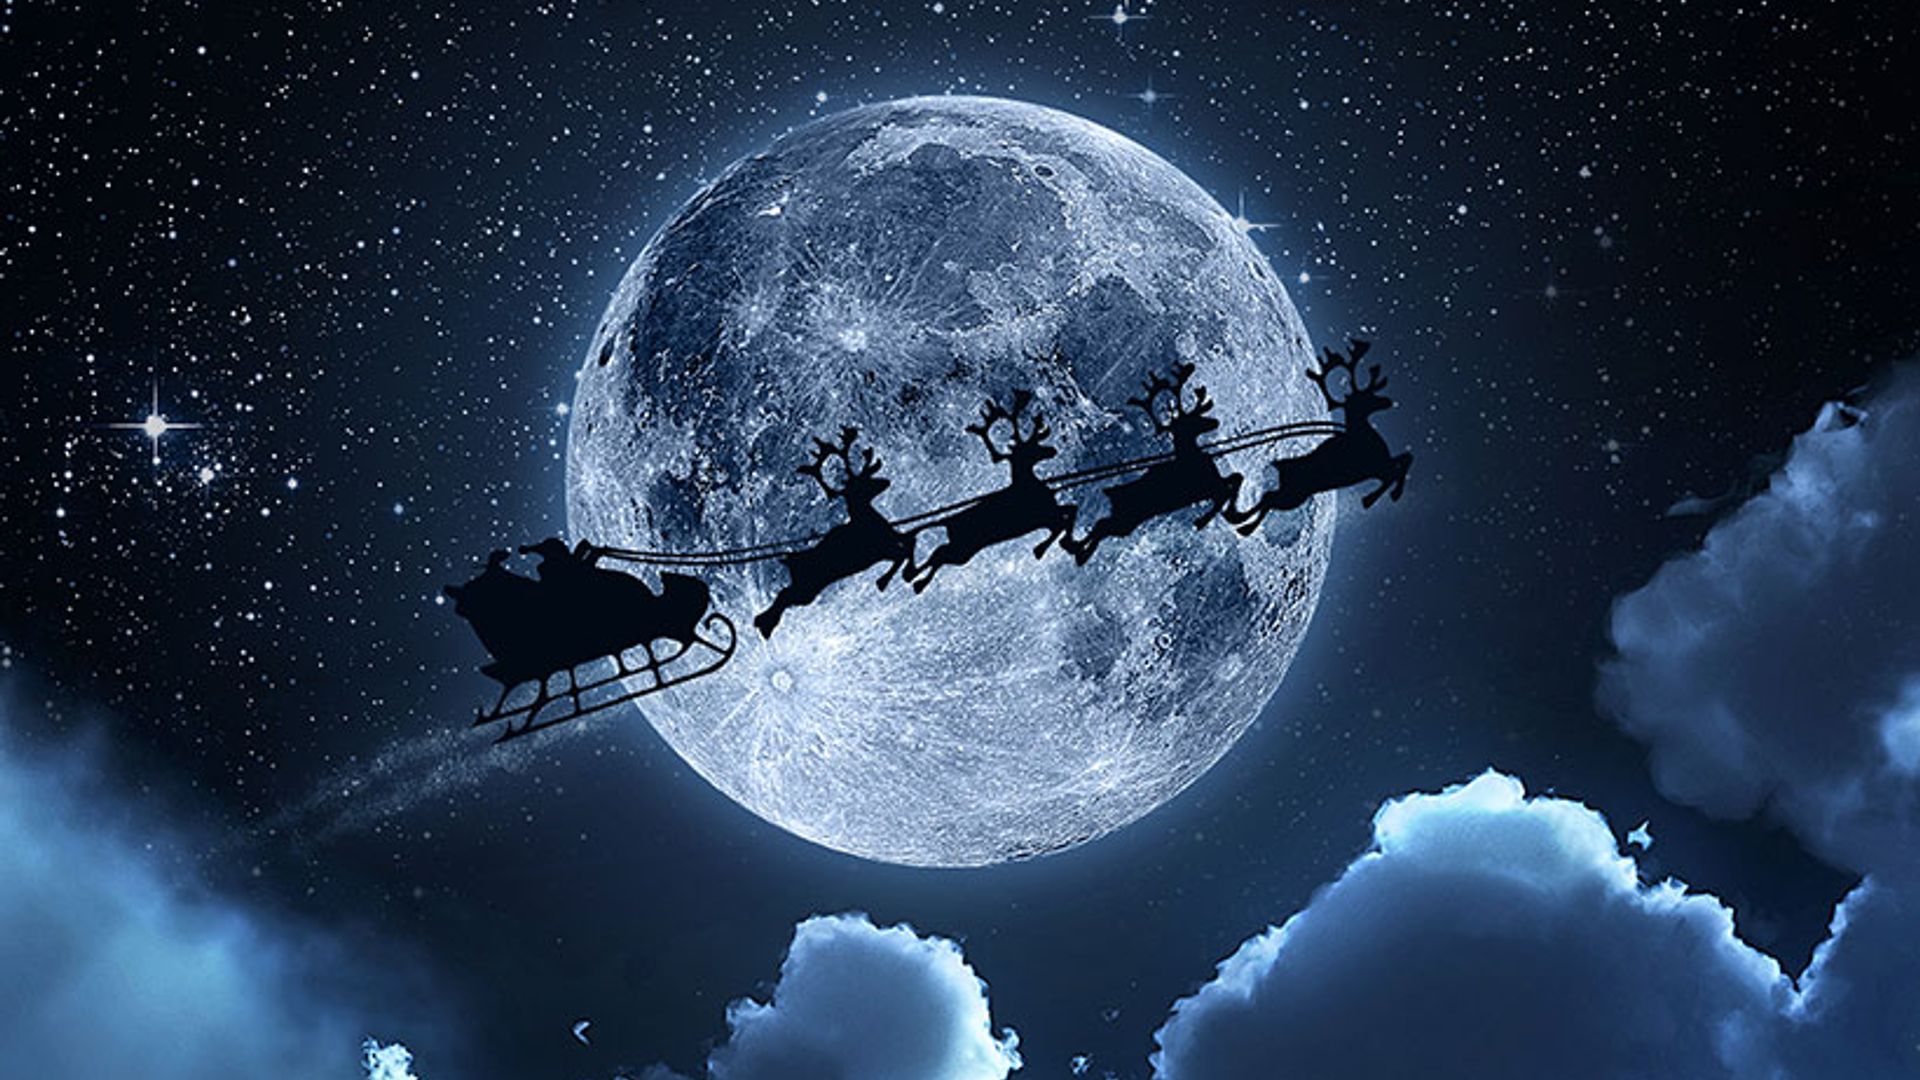 Find out where you and your little ones can spot Santa's sleigh in the sky this Christmas!